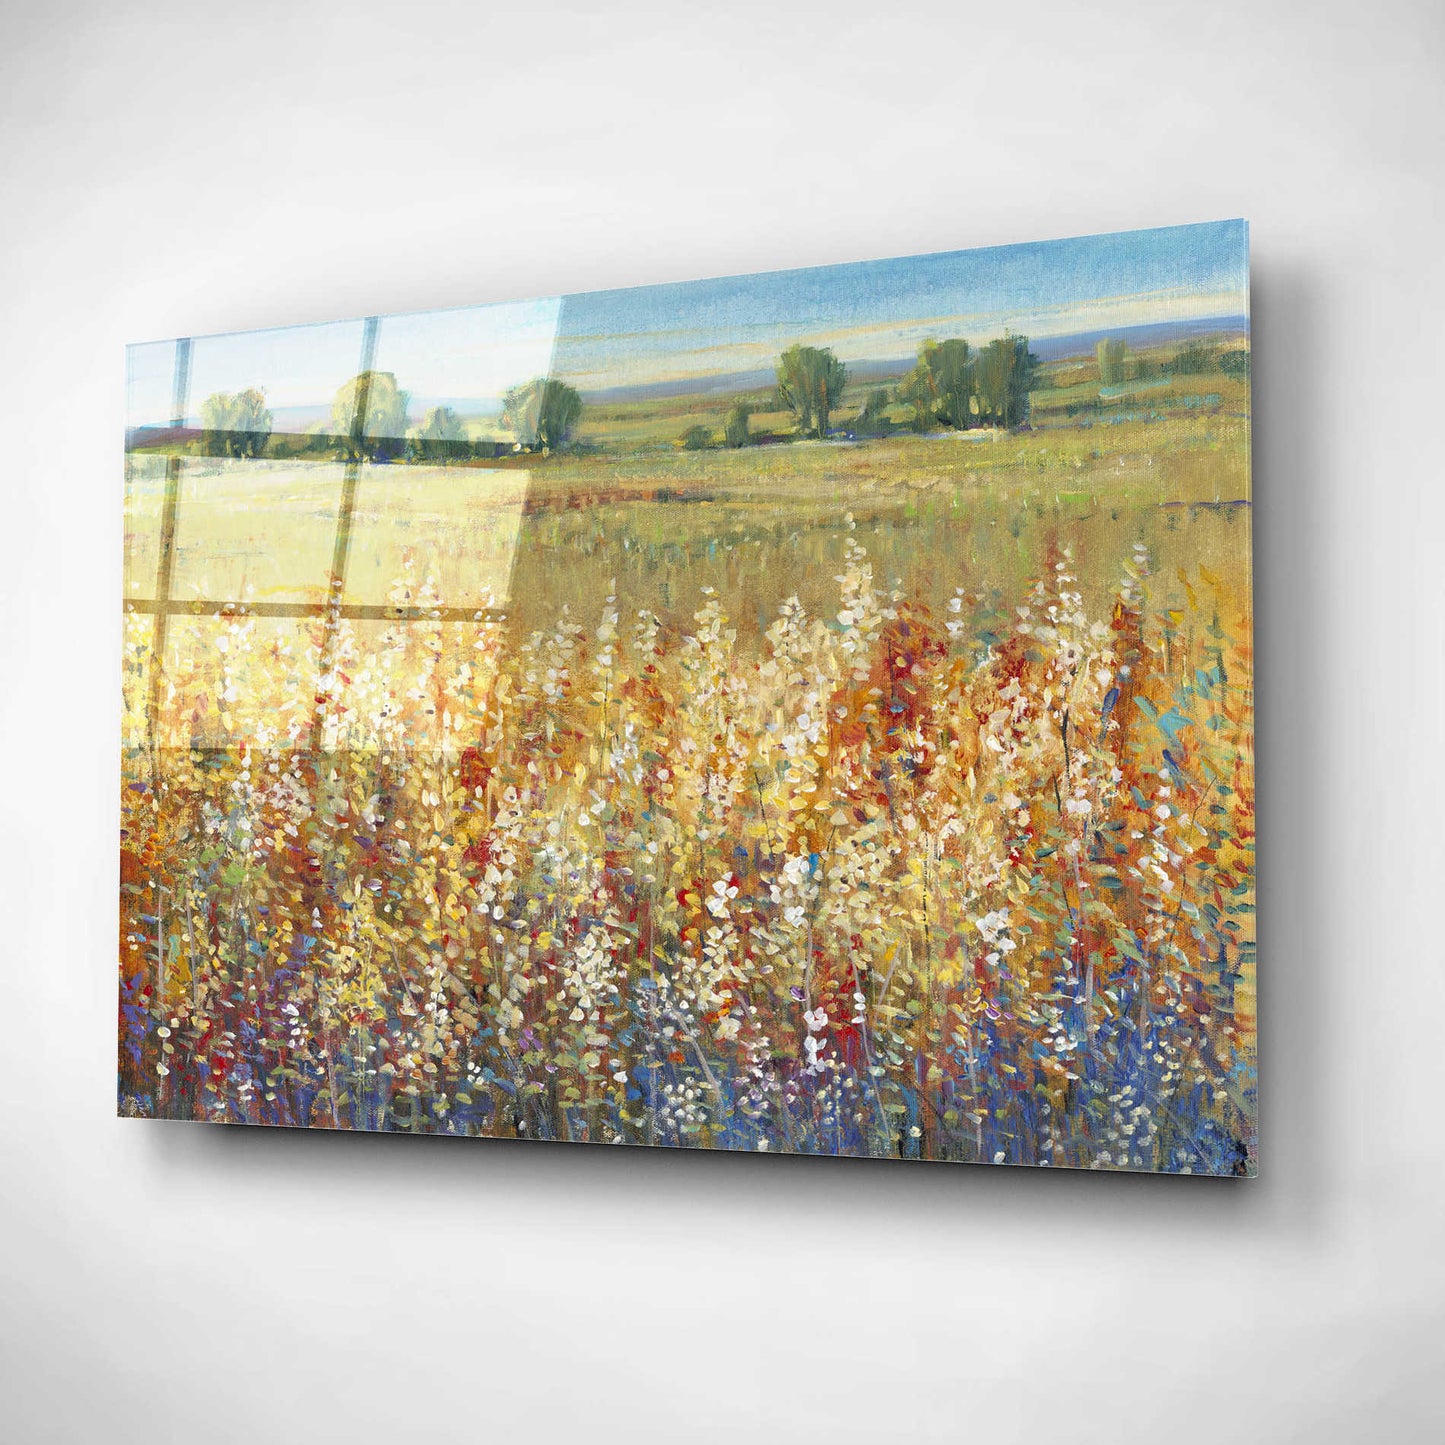 Epic Art 'Gold and Red Field I' by Tim O'Toole, Acrylic Glass Wall Art,16x12